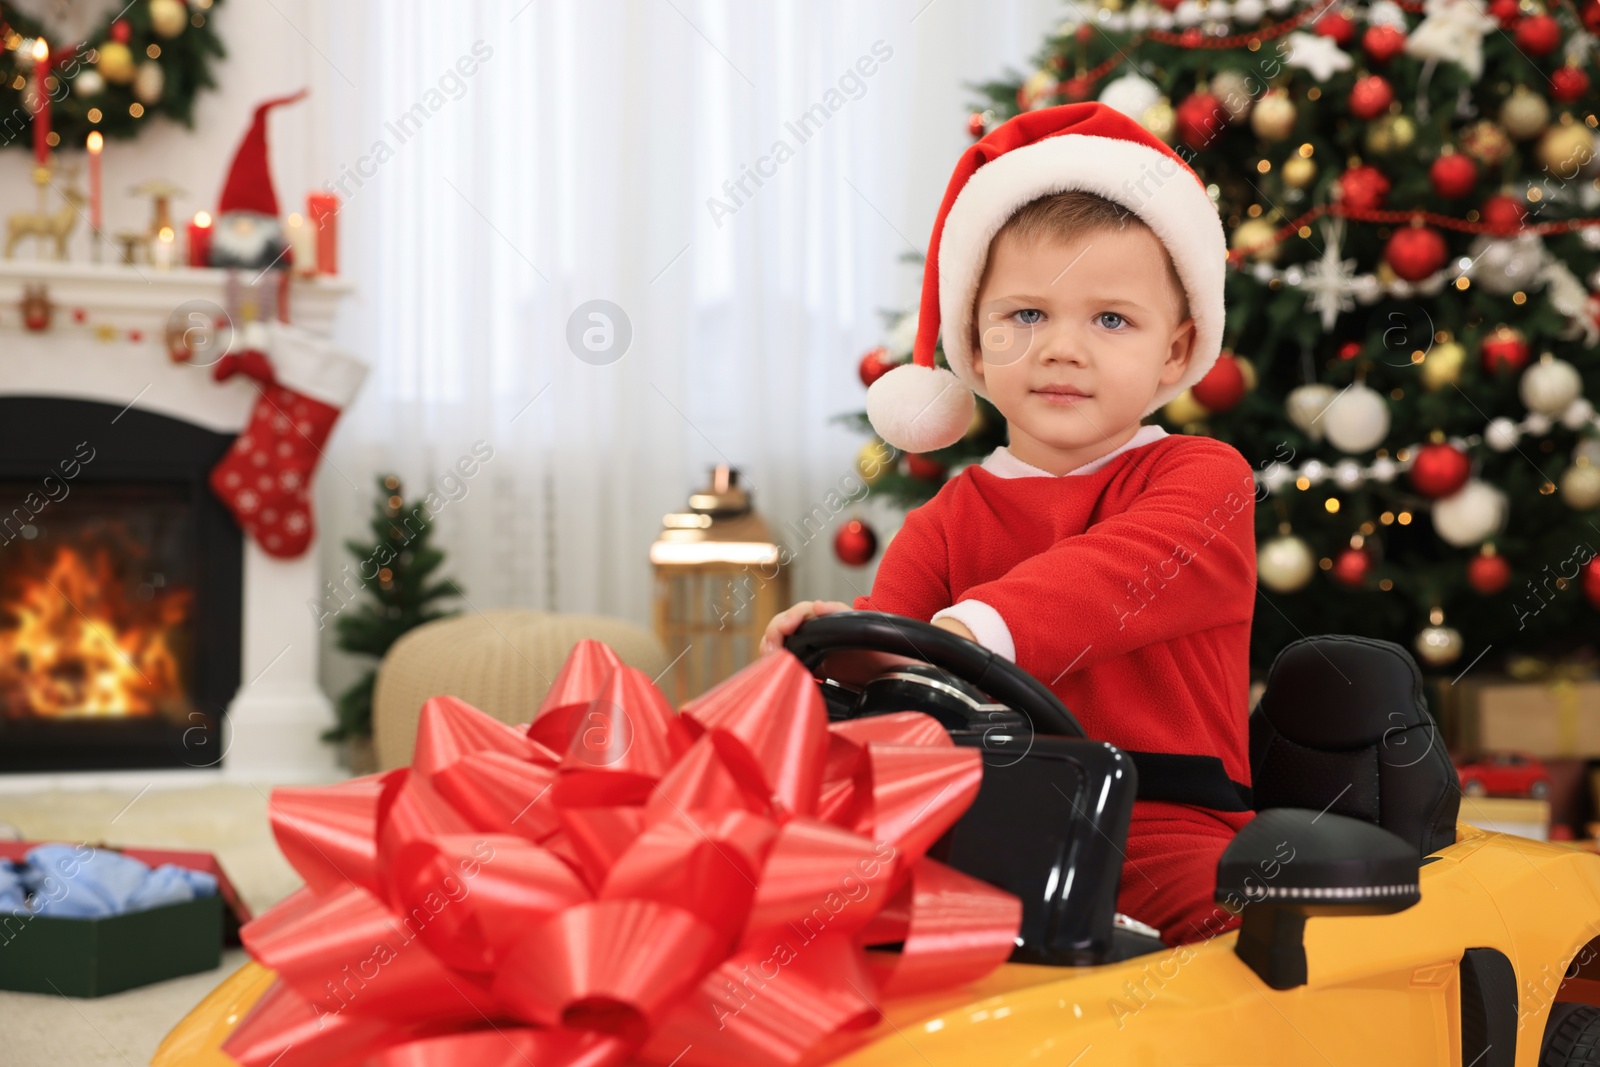 Photo of Cute little boy driving toy car in room decorated for Christmas